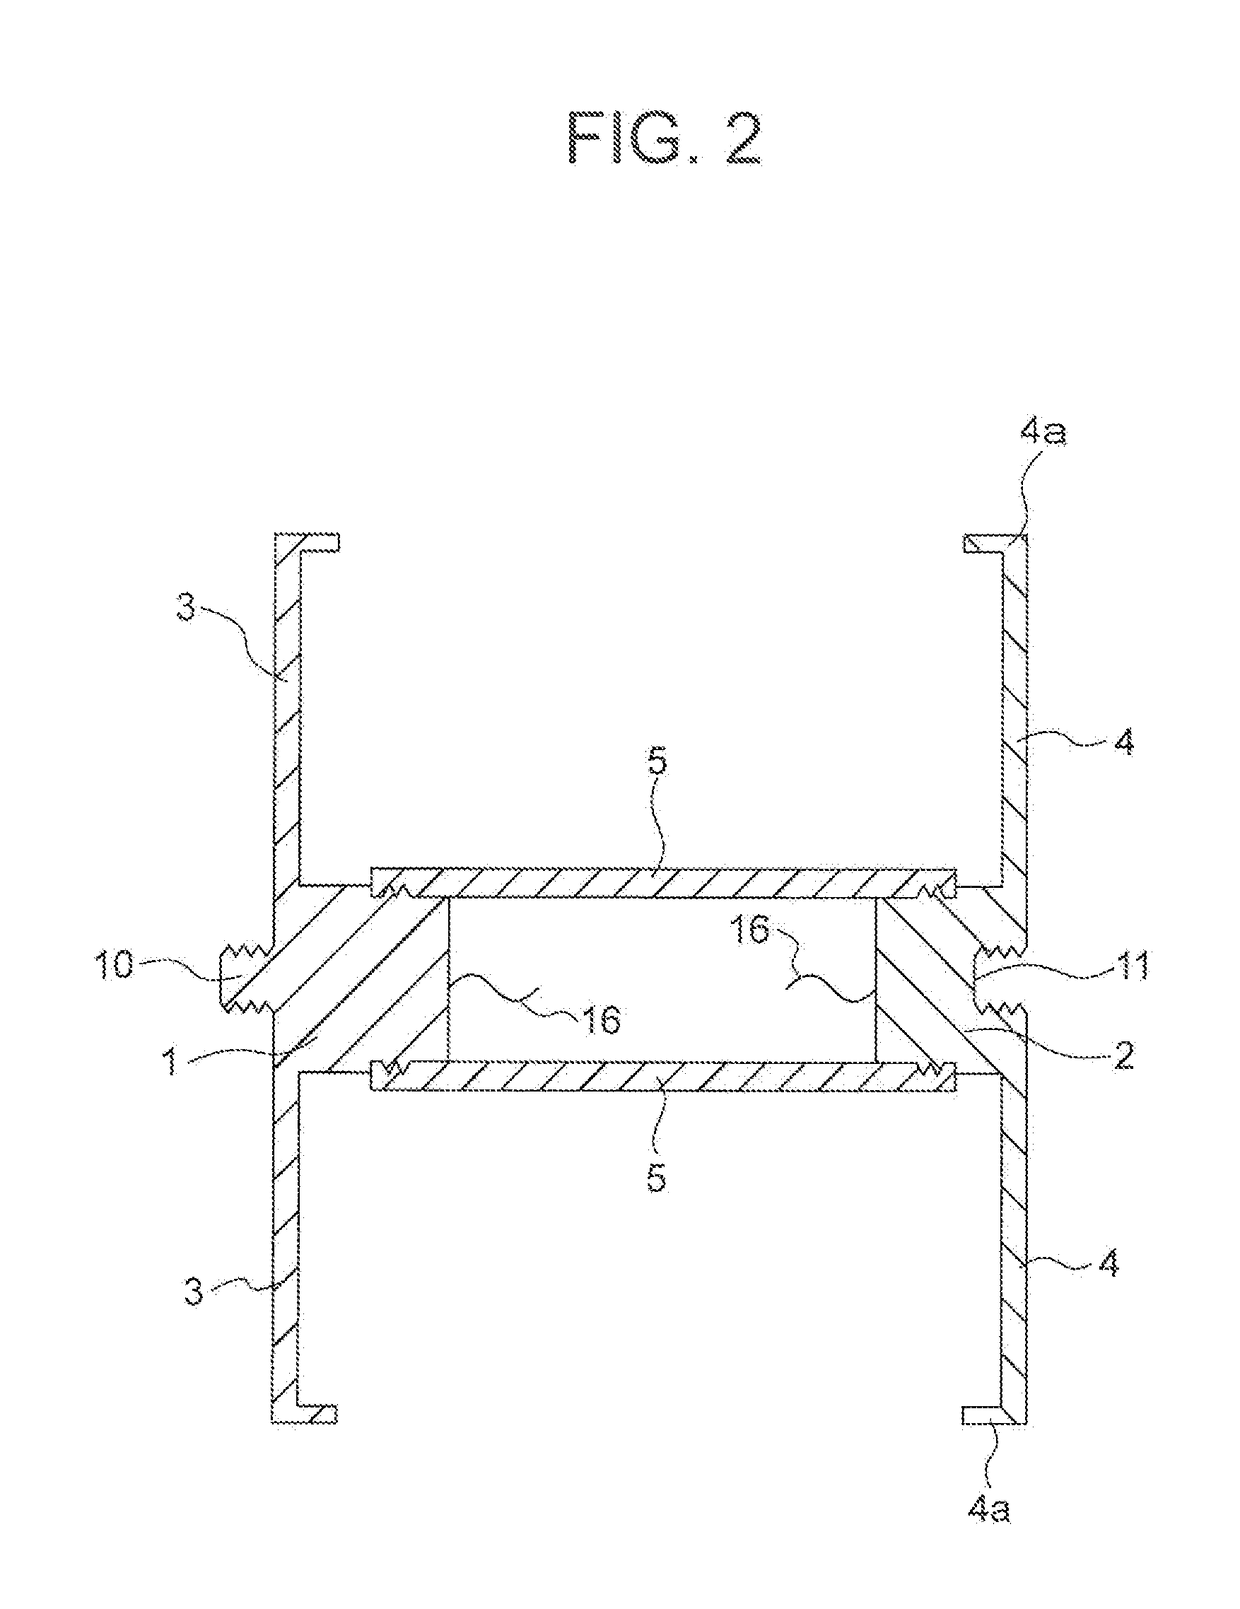 Non-aqueous electrolyte secondary battery cell and assembled battery using same